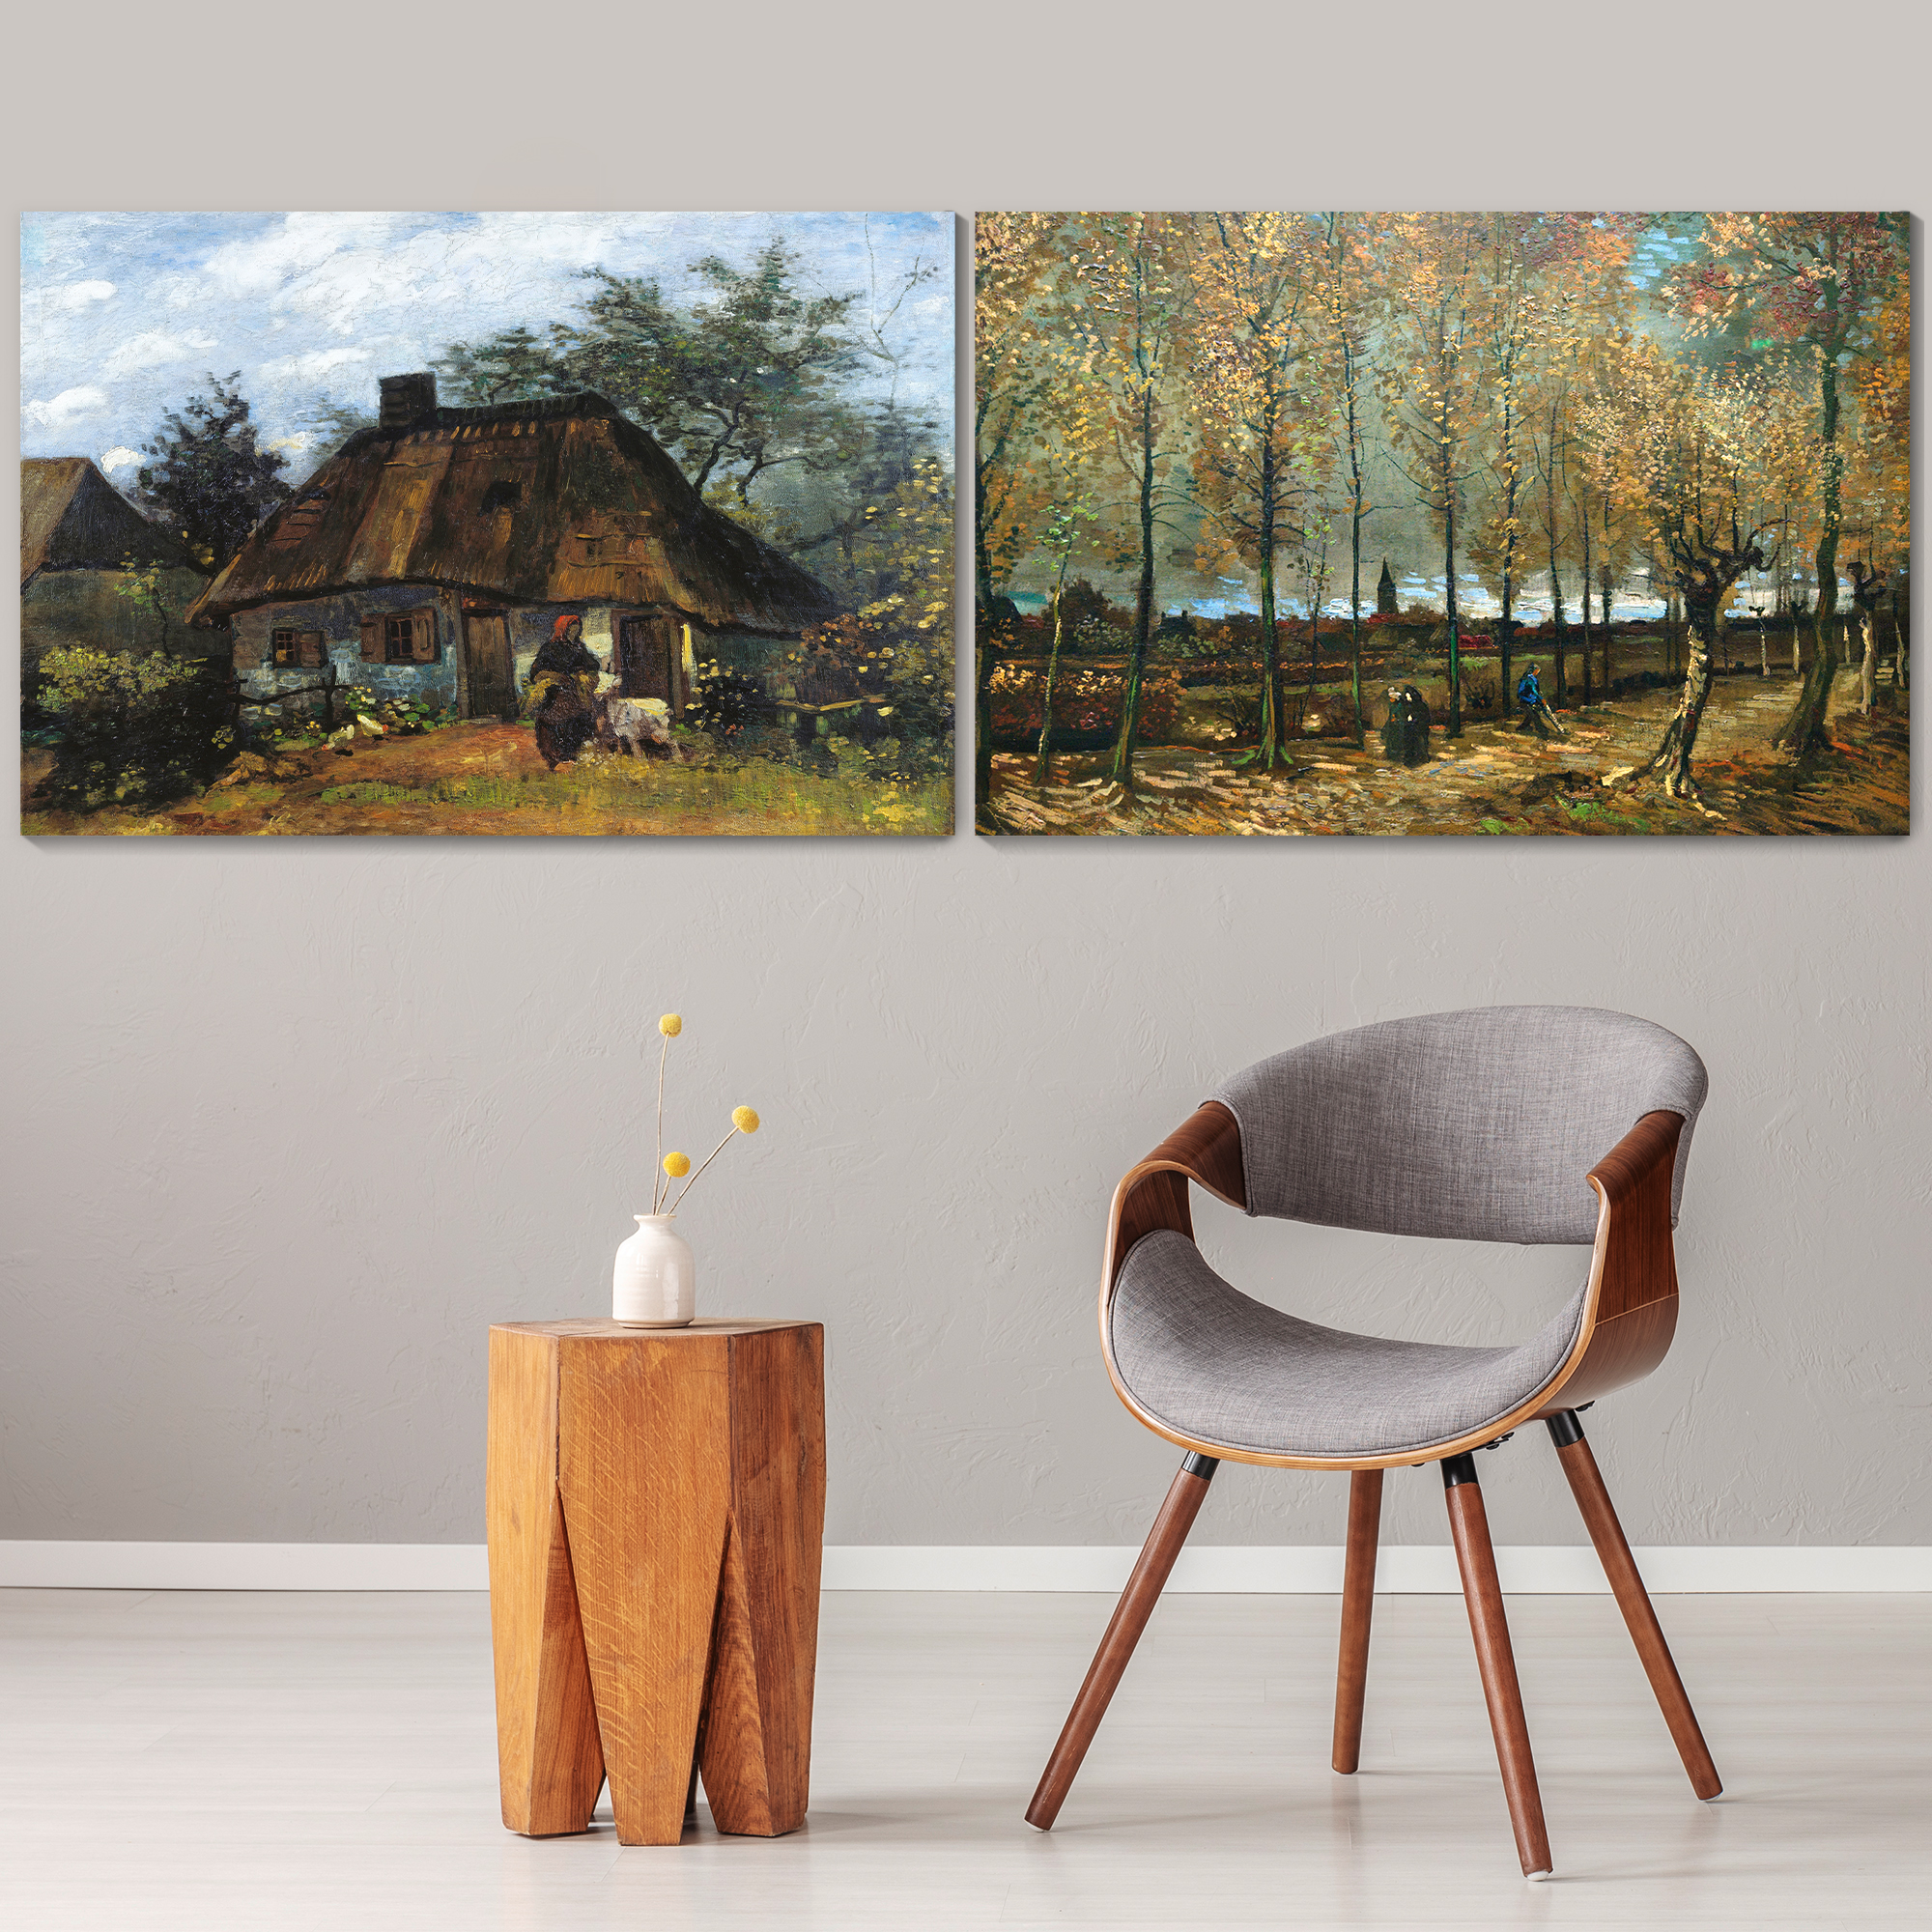 Wall26 - Lane with Poplars near Nuenen/Farmhouse in Nuenen by Vincent Van Gogh - Oil Painting Reproduction in Set of 2 | Canvas Prints Wall Art, Ready to Hang - 16